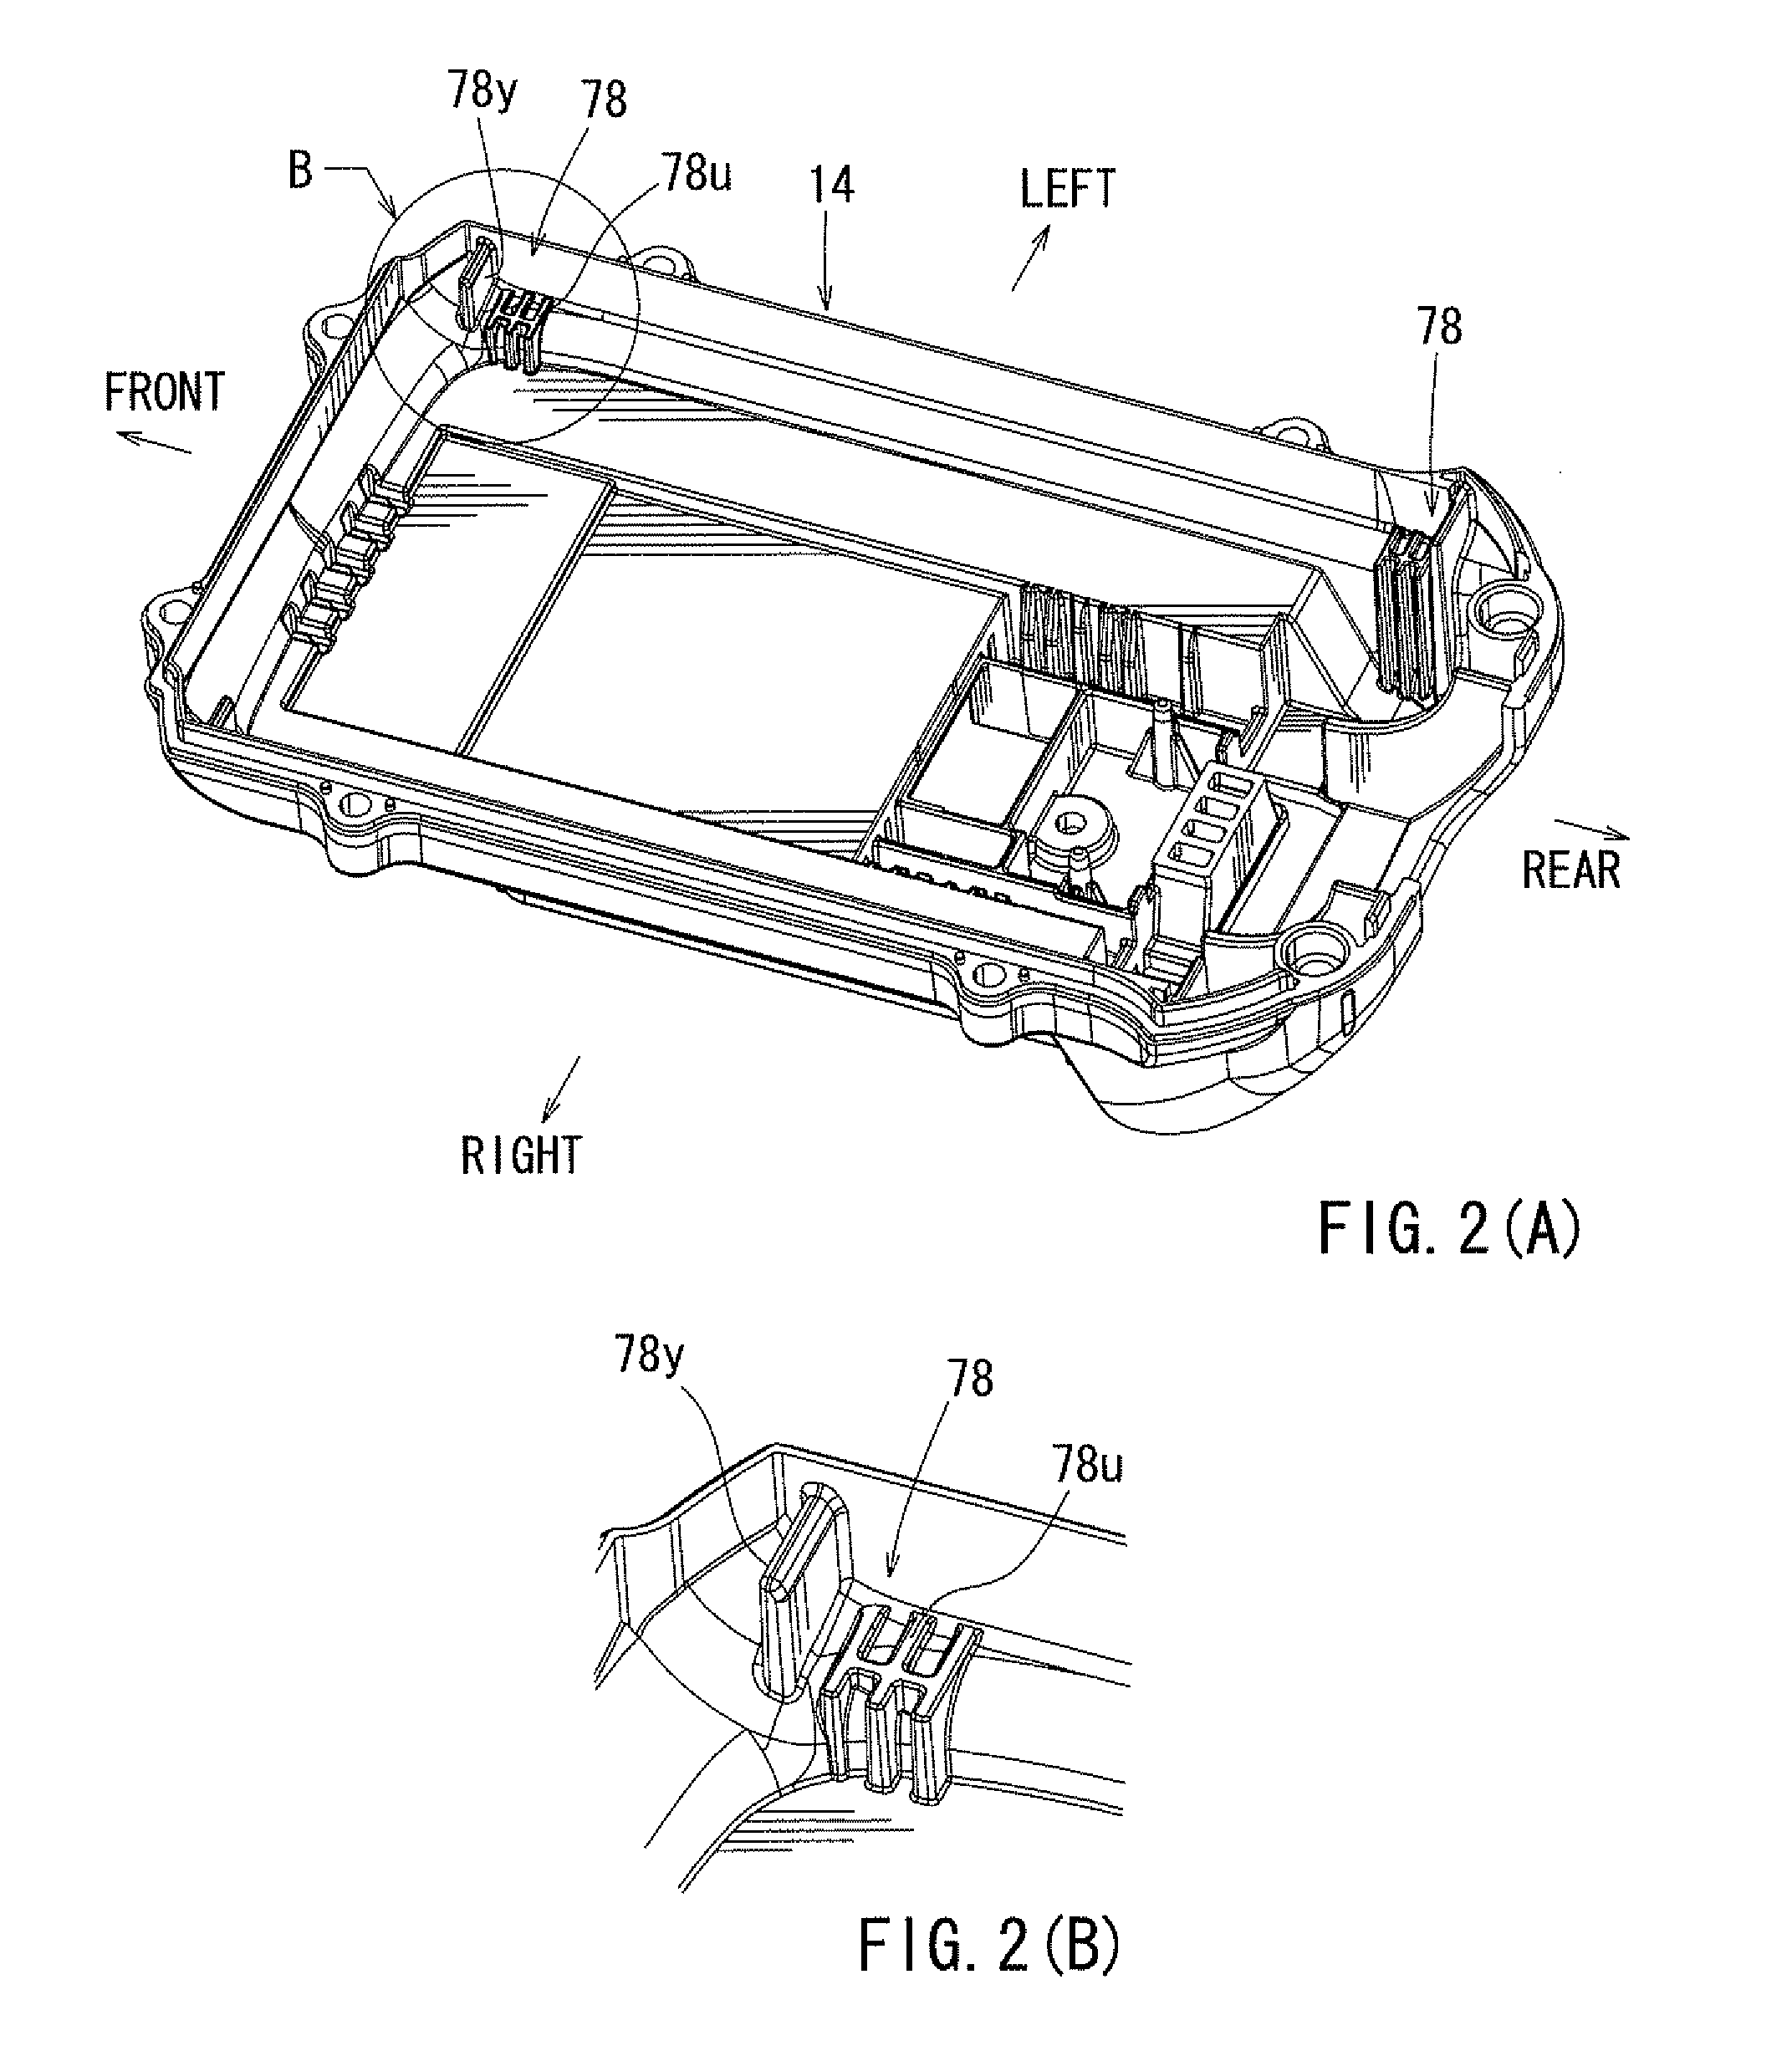 Battery pack including a shock absorbing device